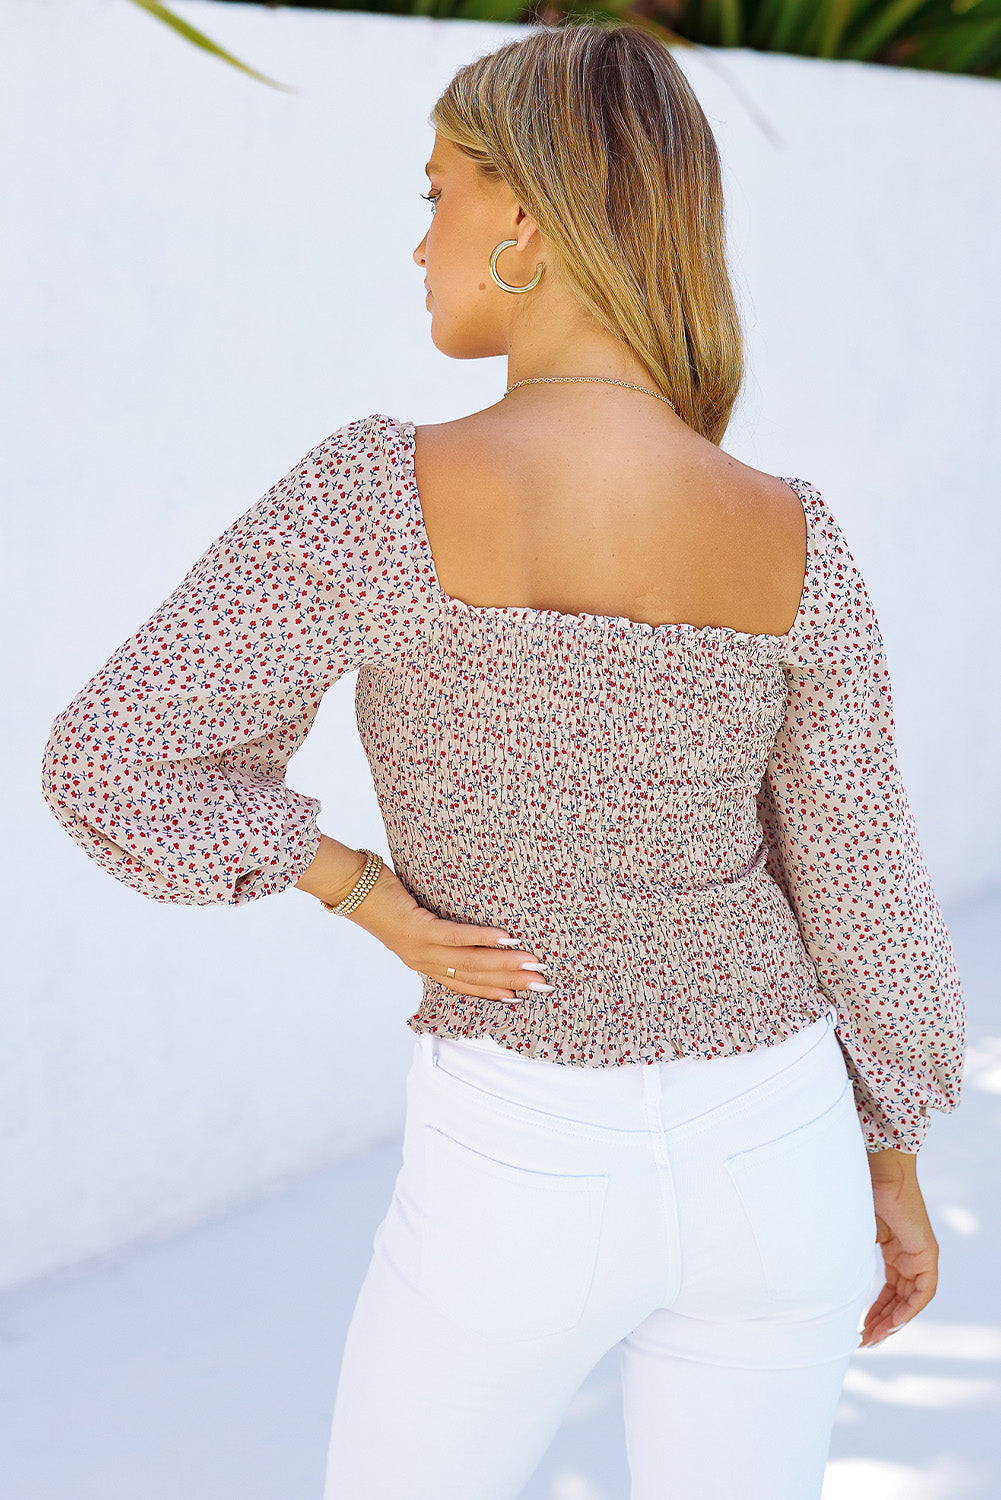 Apricot Square Neck Puff Sleeve Floral Smocked Top Long Sleeve Tops JT's Designer Fashion